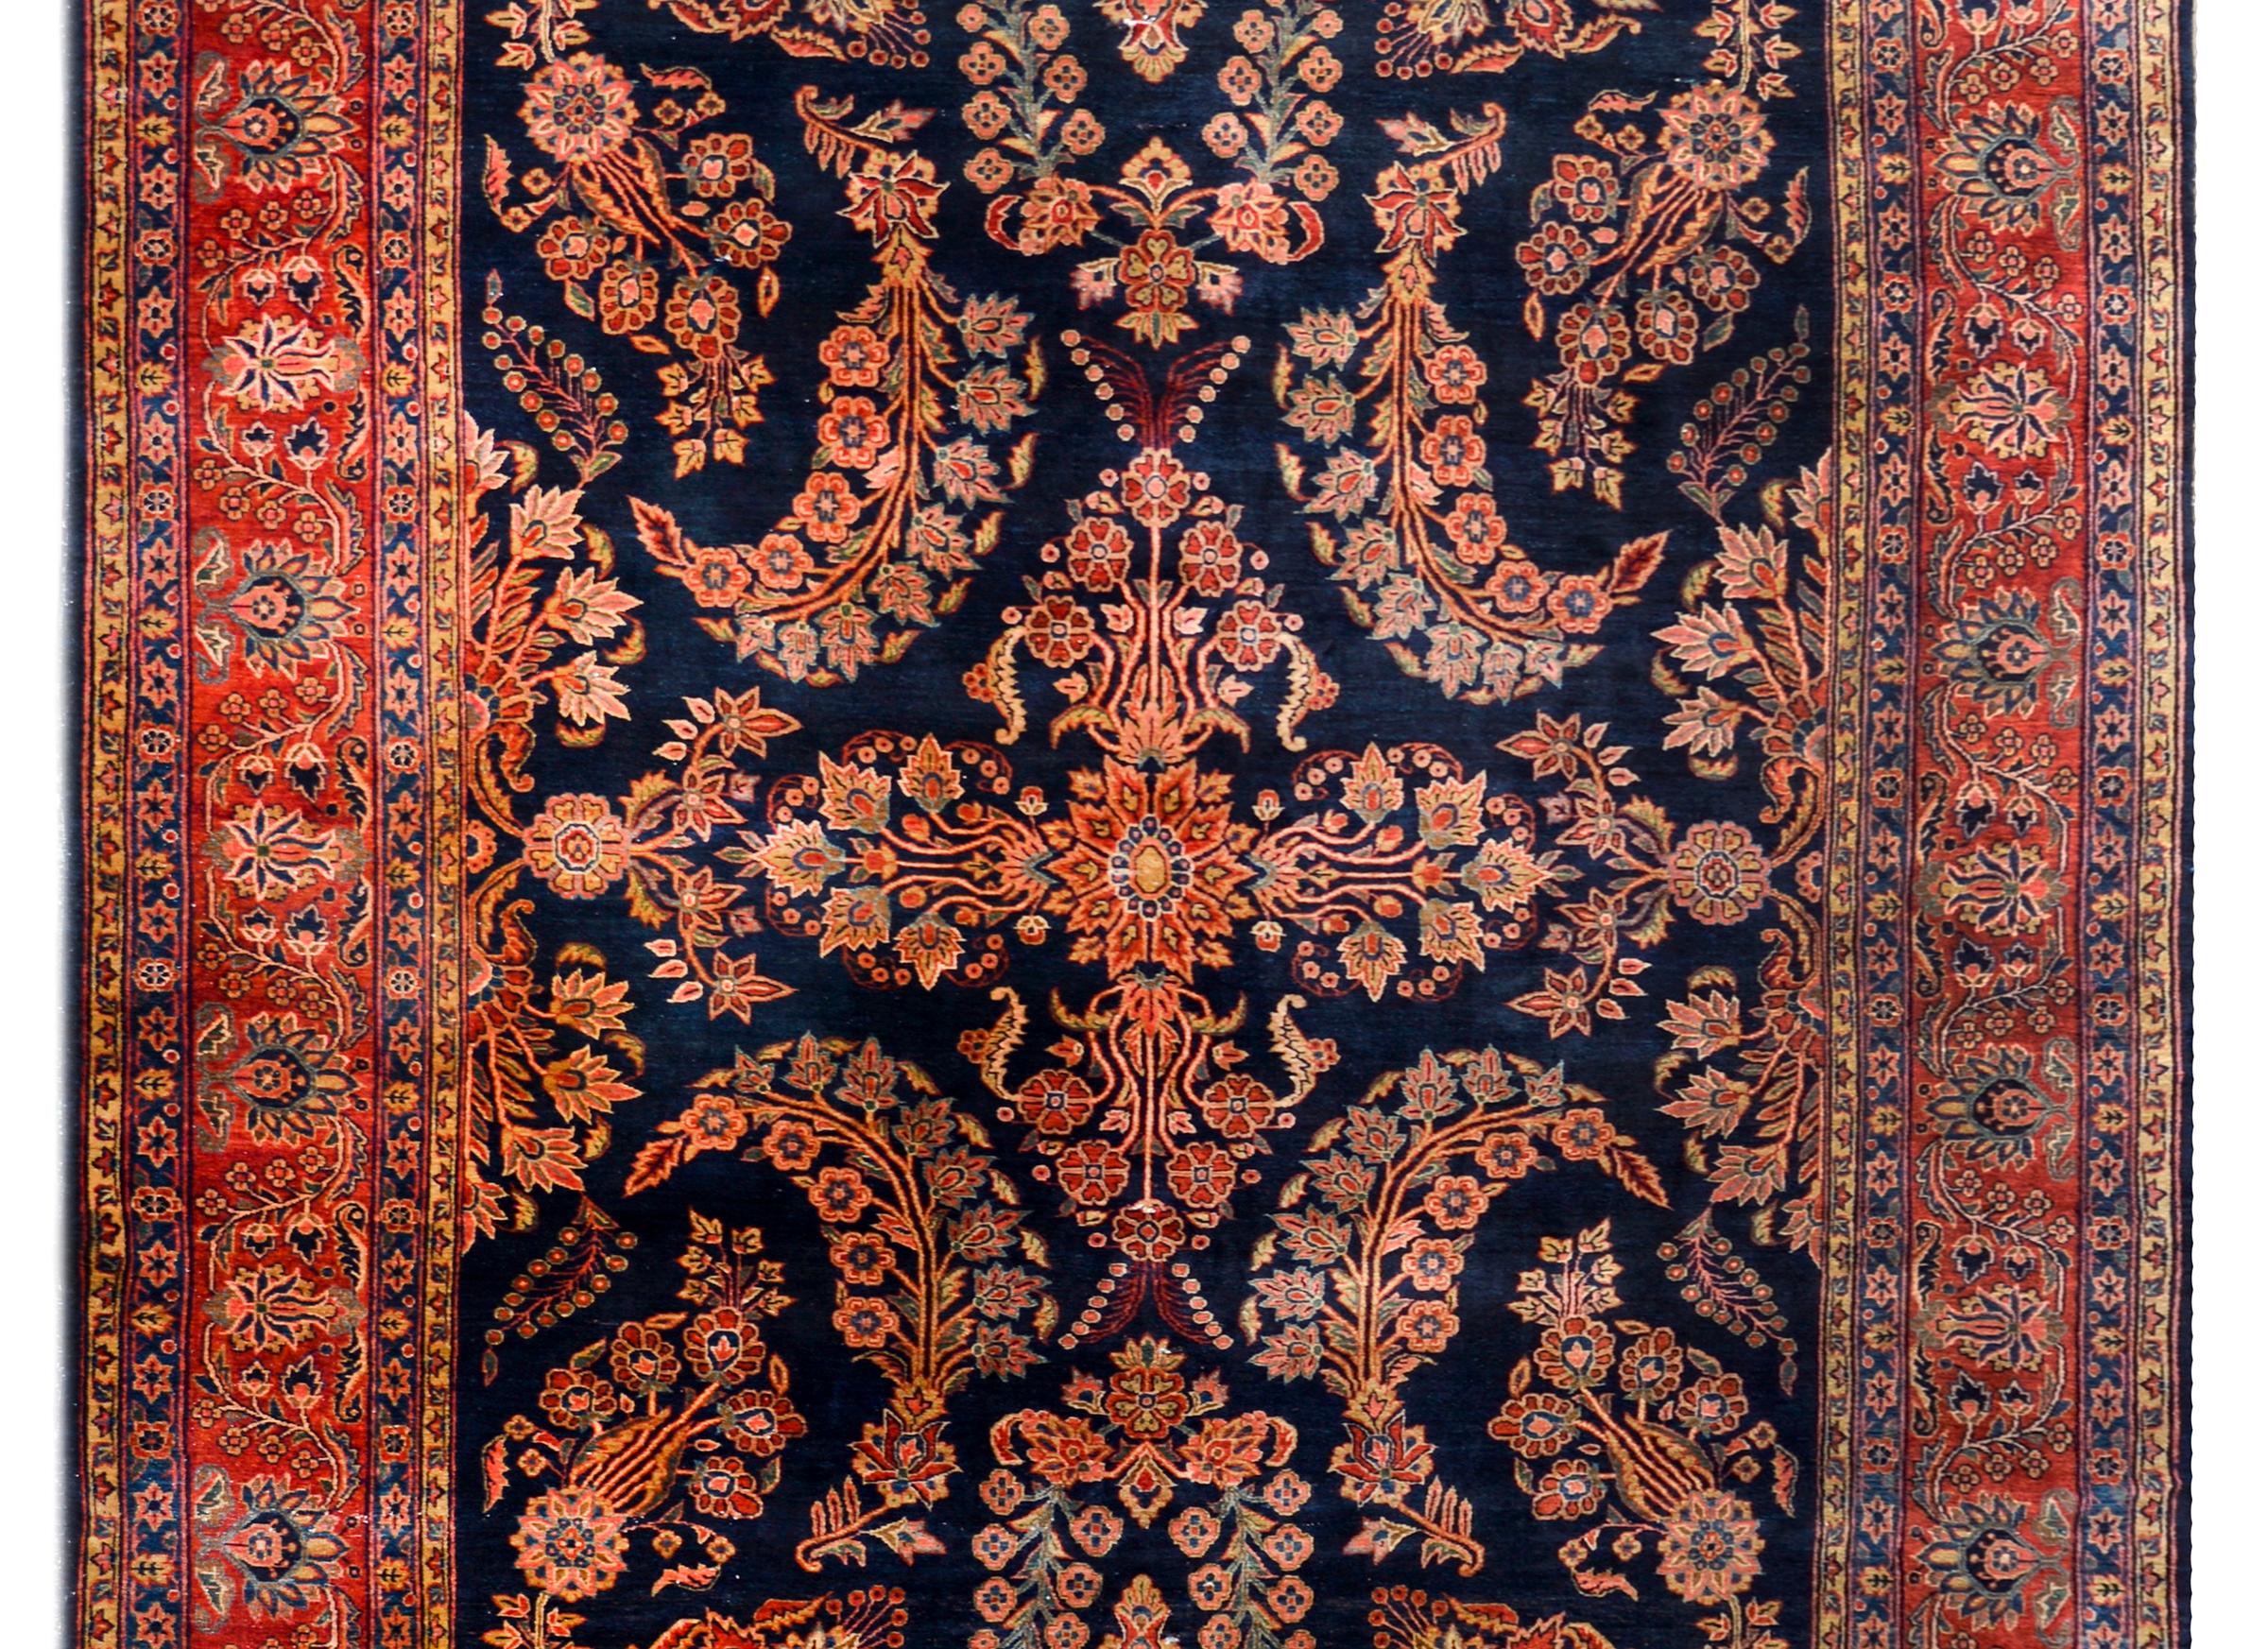 An incredible early 20th century Persian Mohajeran rug with a large-scale mirrored floral cluster pattern with pink, crimson, light and dark indigo, and cream, against a dark indigo background, and surrounded by a beautiful wide floral pattered